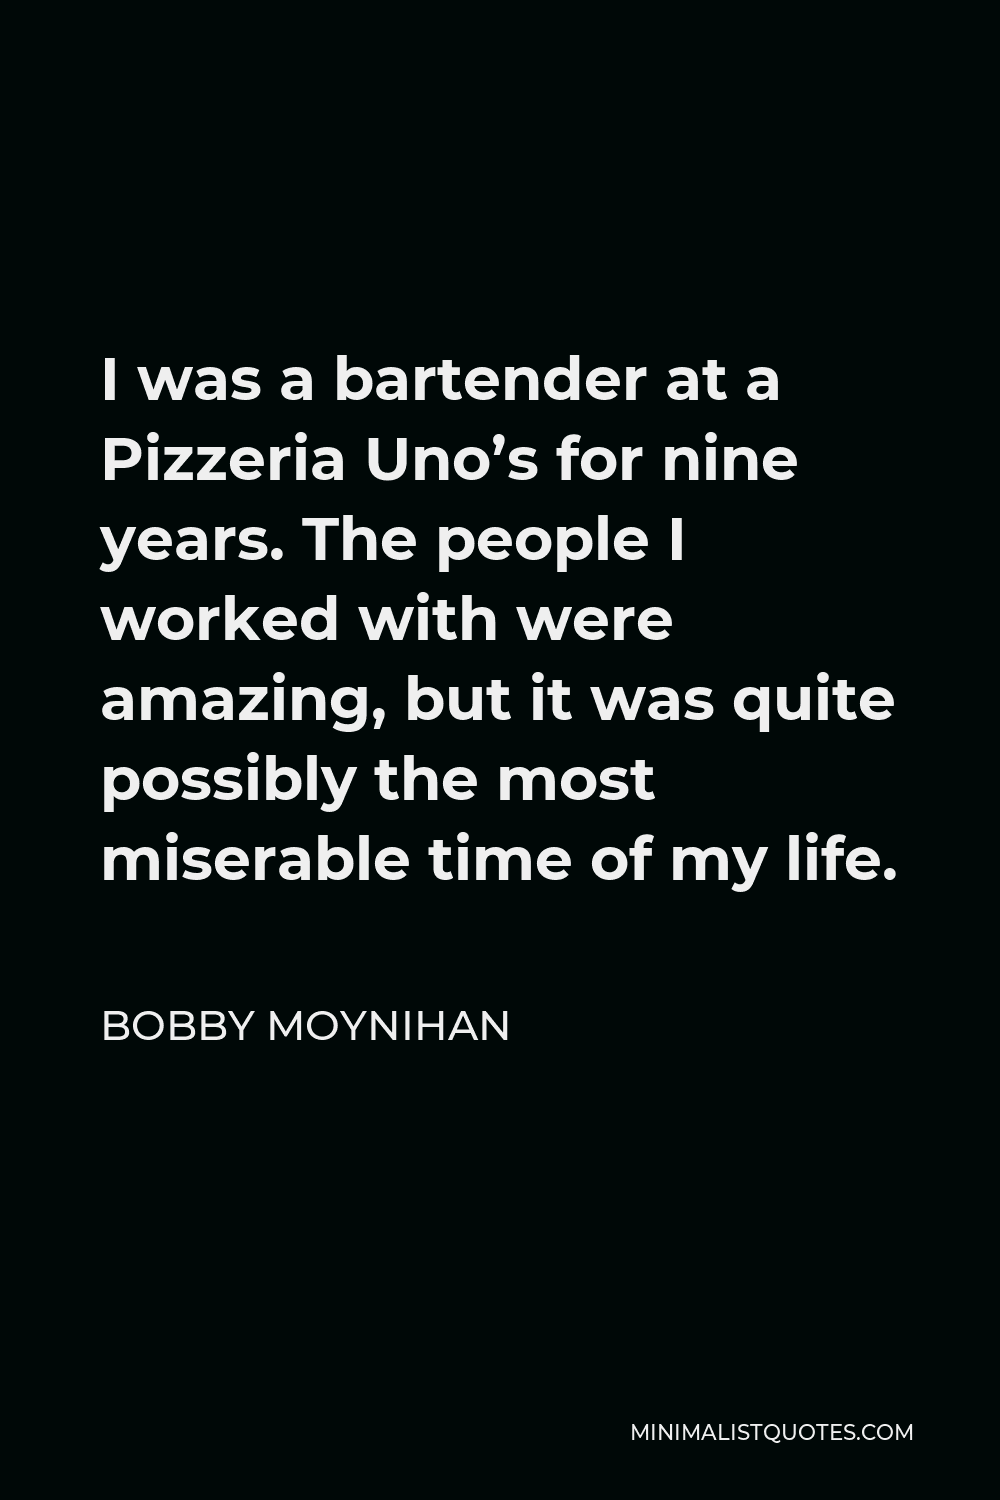 Bobby Moynihan Quote - I was a bartender at a Pizzeria Uno’s for nine years. The people I worked with were amazing, but it was quite possibly the most miserable time of my life.